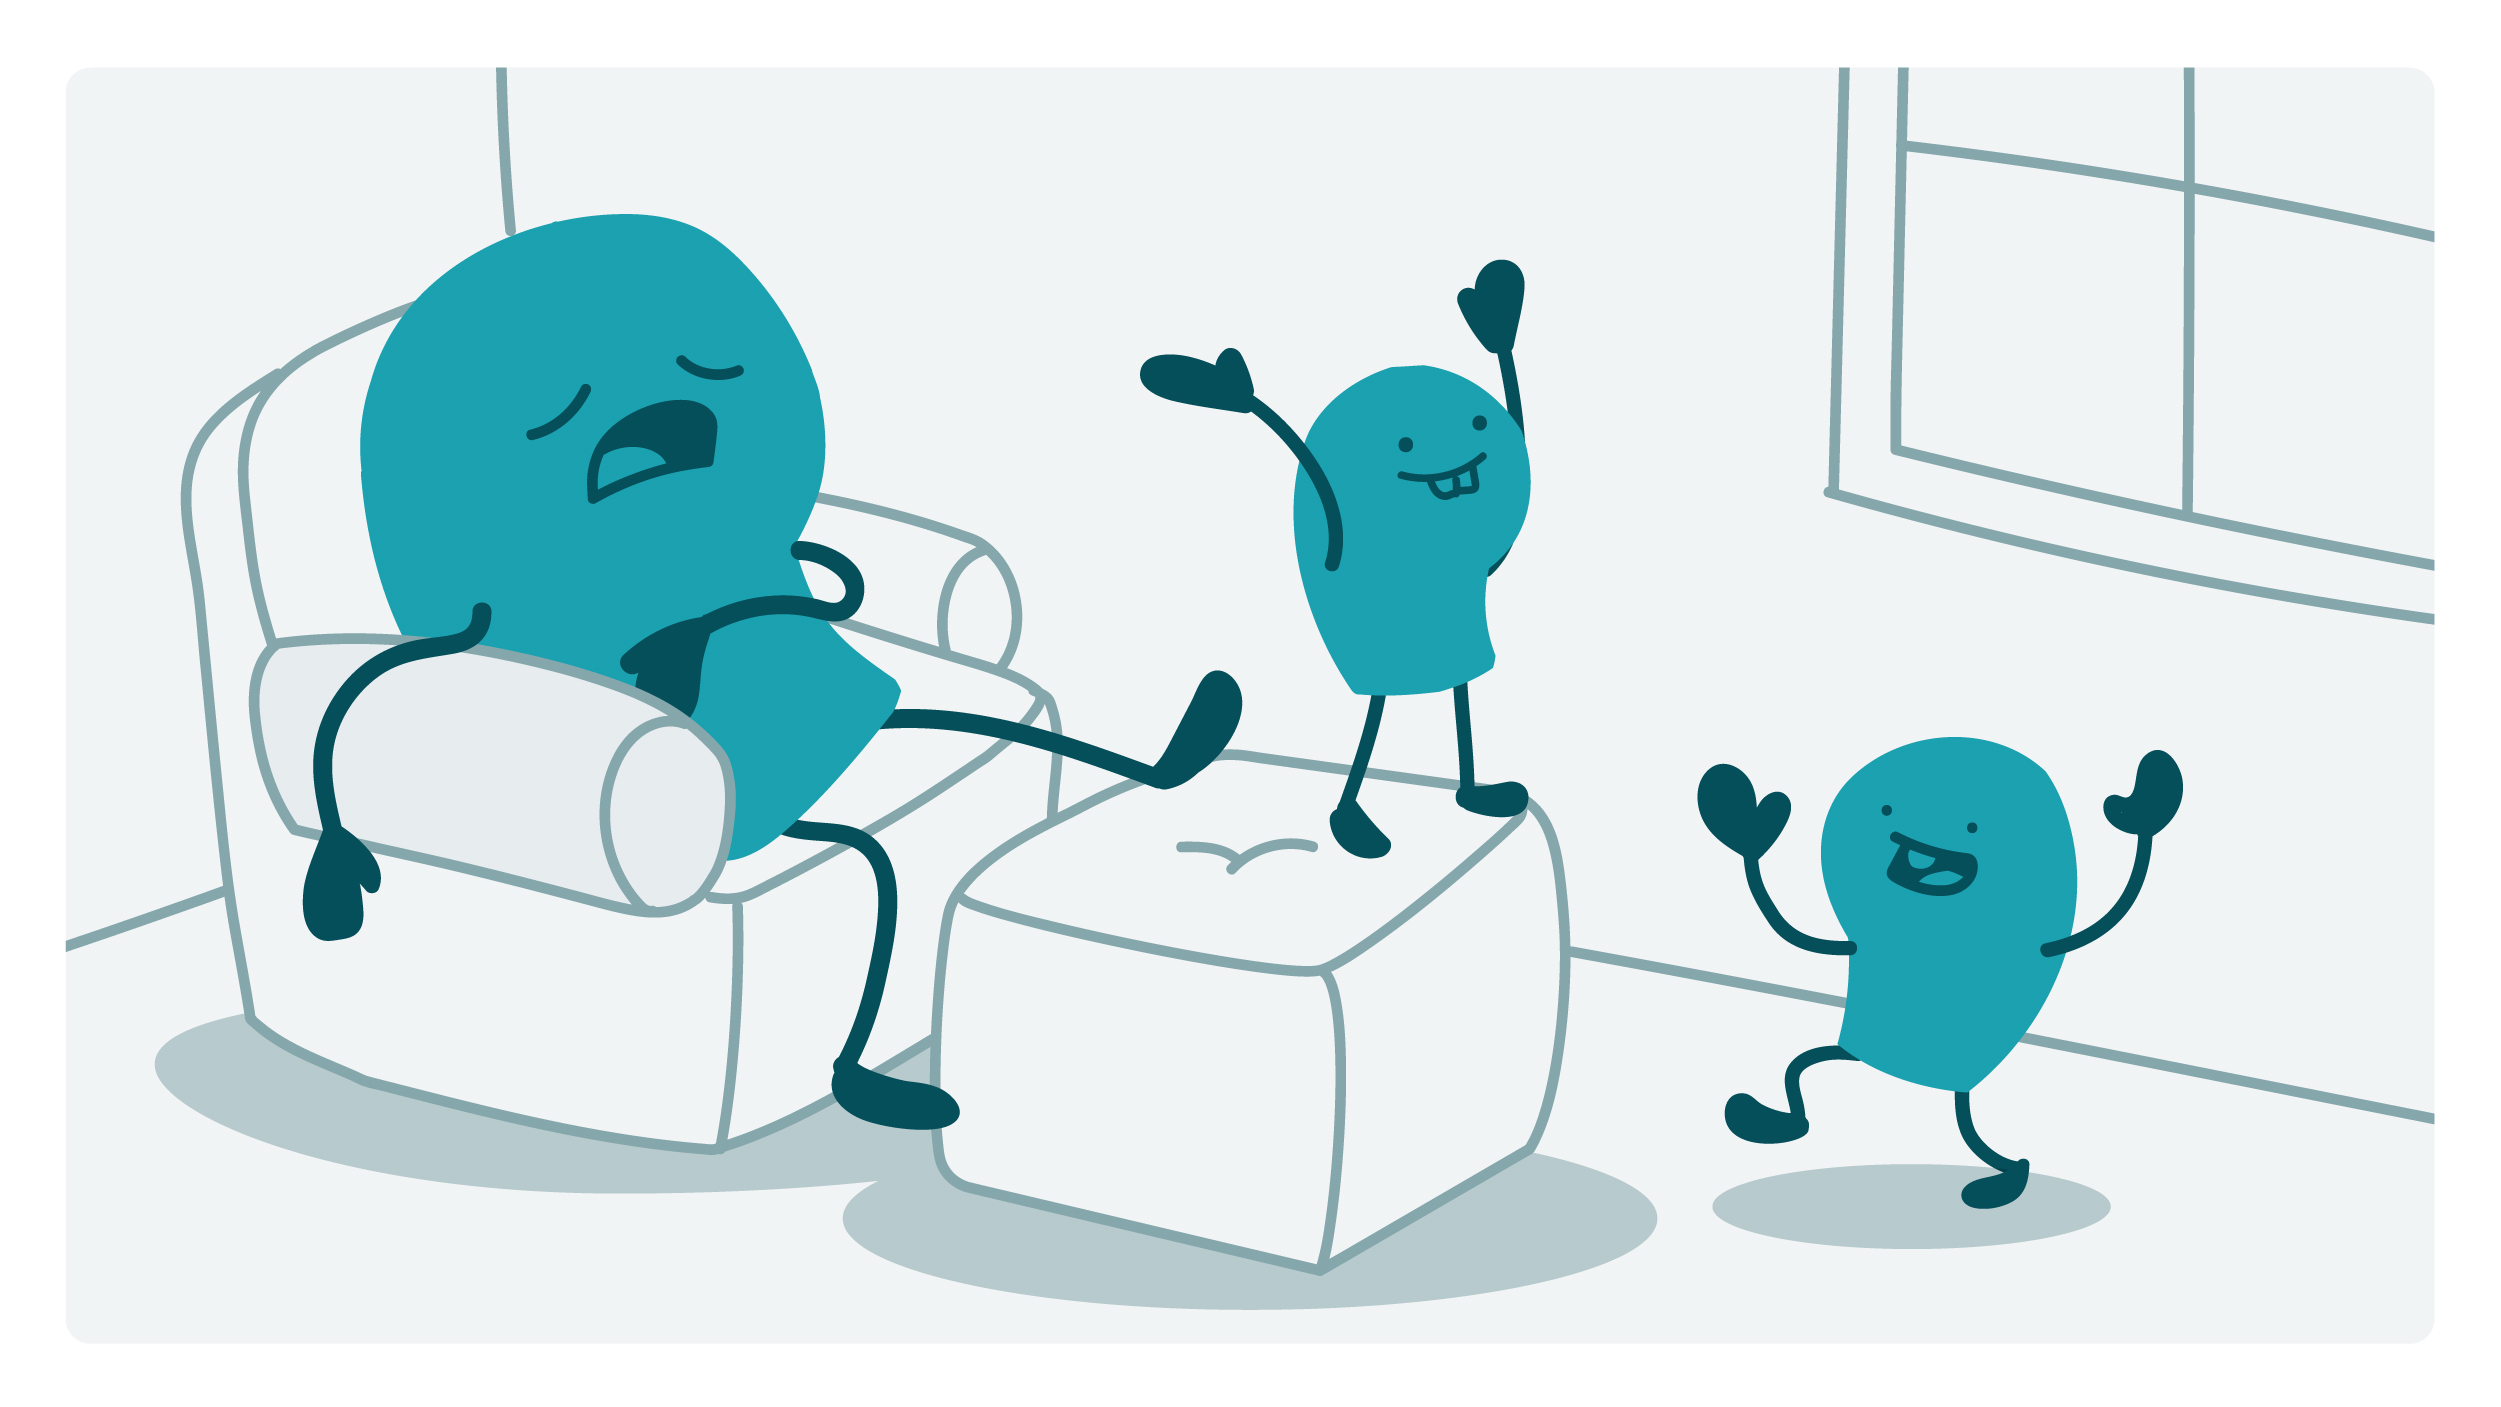 A parent doodle looks exhausted as 2 kid doodles run wild around the living room.